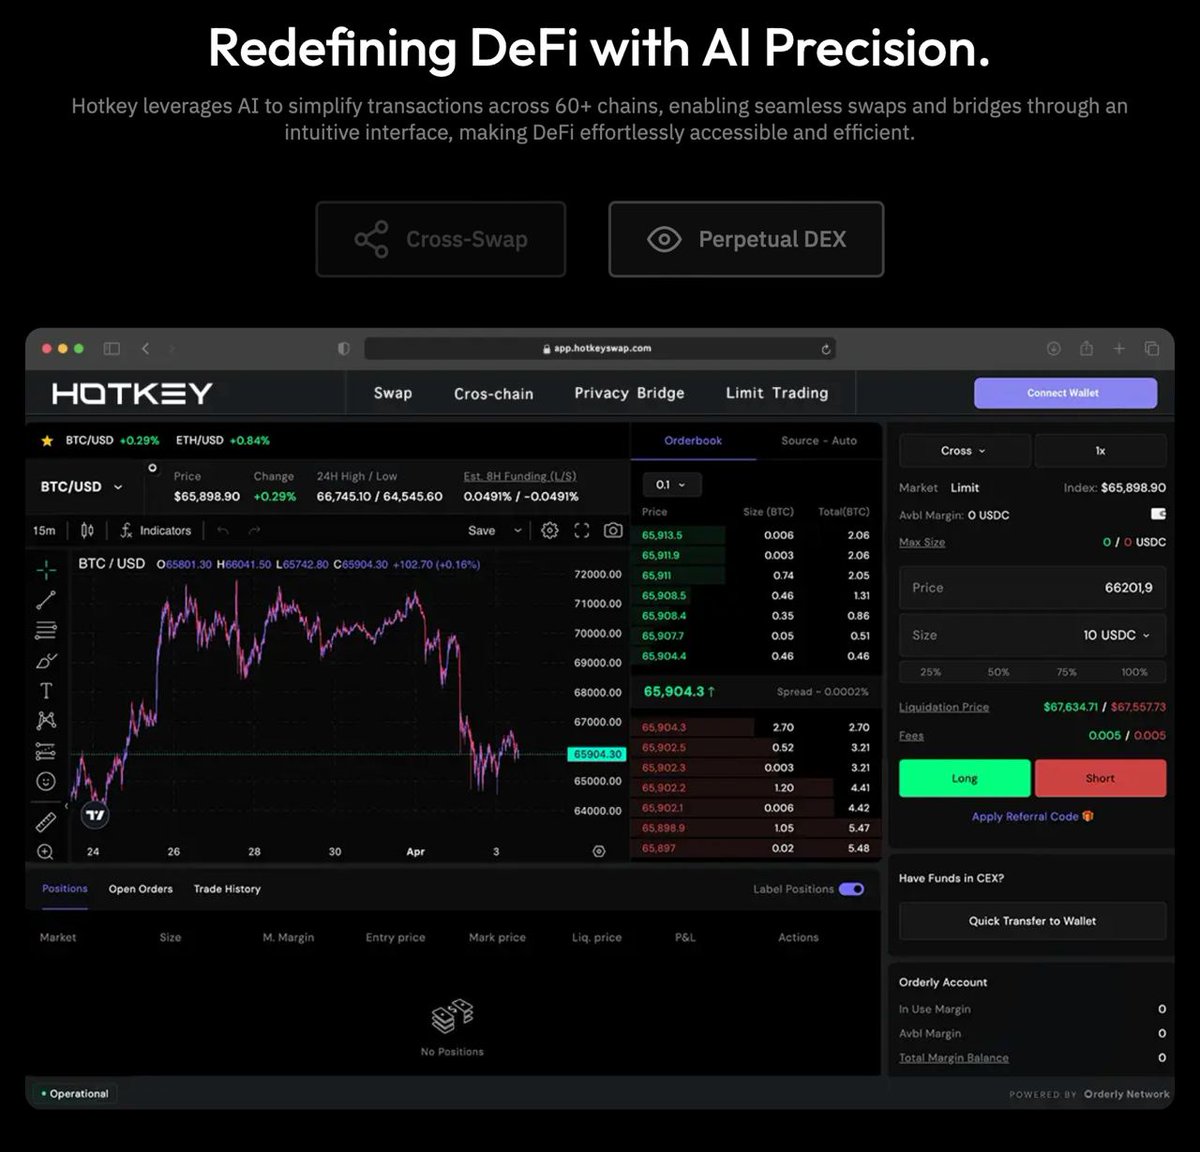 Maximize your trading efficiency with our upcoming PRO DEX, featuring advanced limit orders and access to multiple liquidity providers, including the orderly network. Optimize your strategies and capitalize on market opportunities today! Explore the benefits at